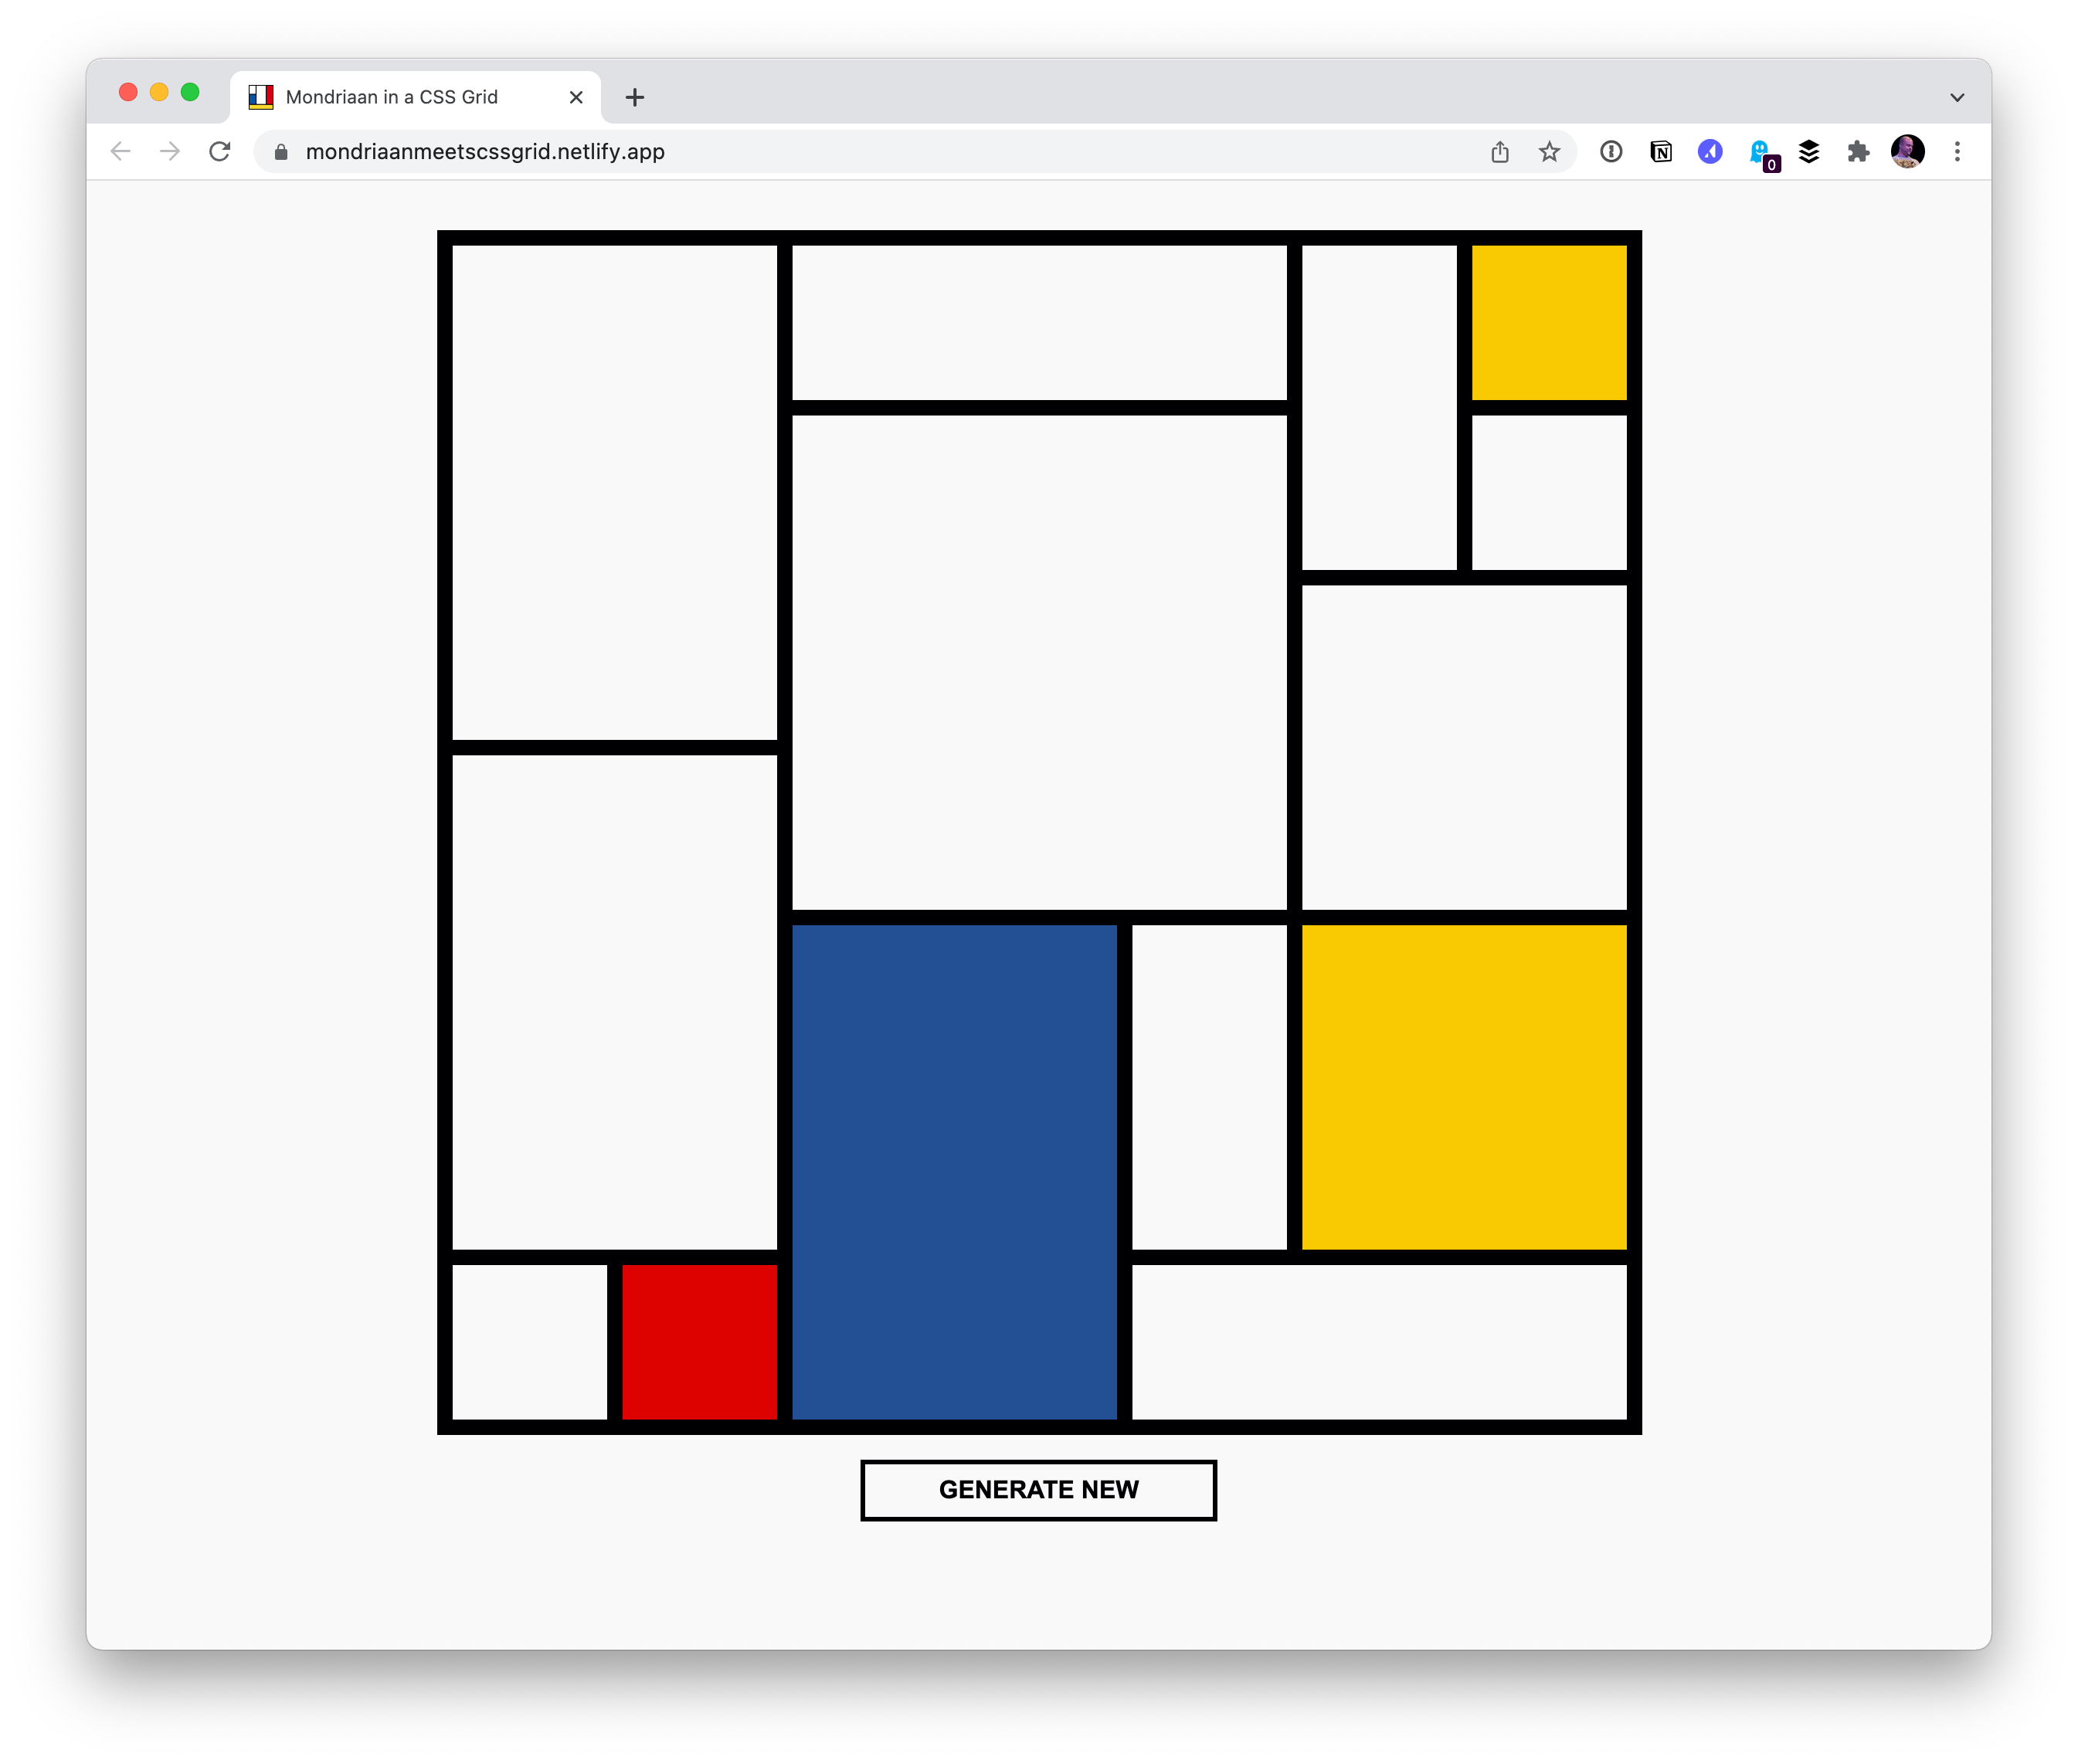 An example of Mondrian Art in CSS with a "Generate New" option. The example is a square box with plenty of padding around it on the white background page.